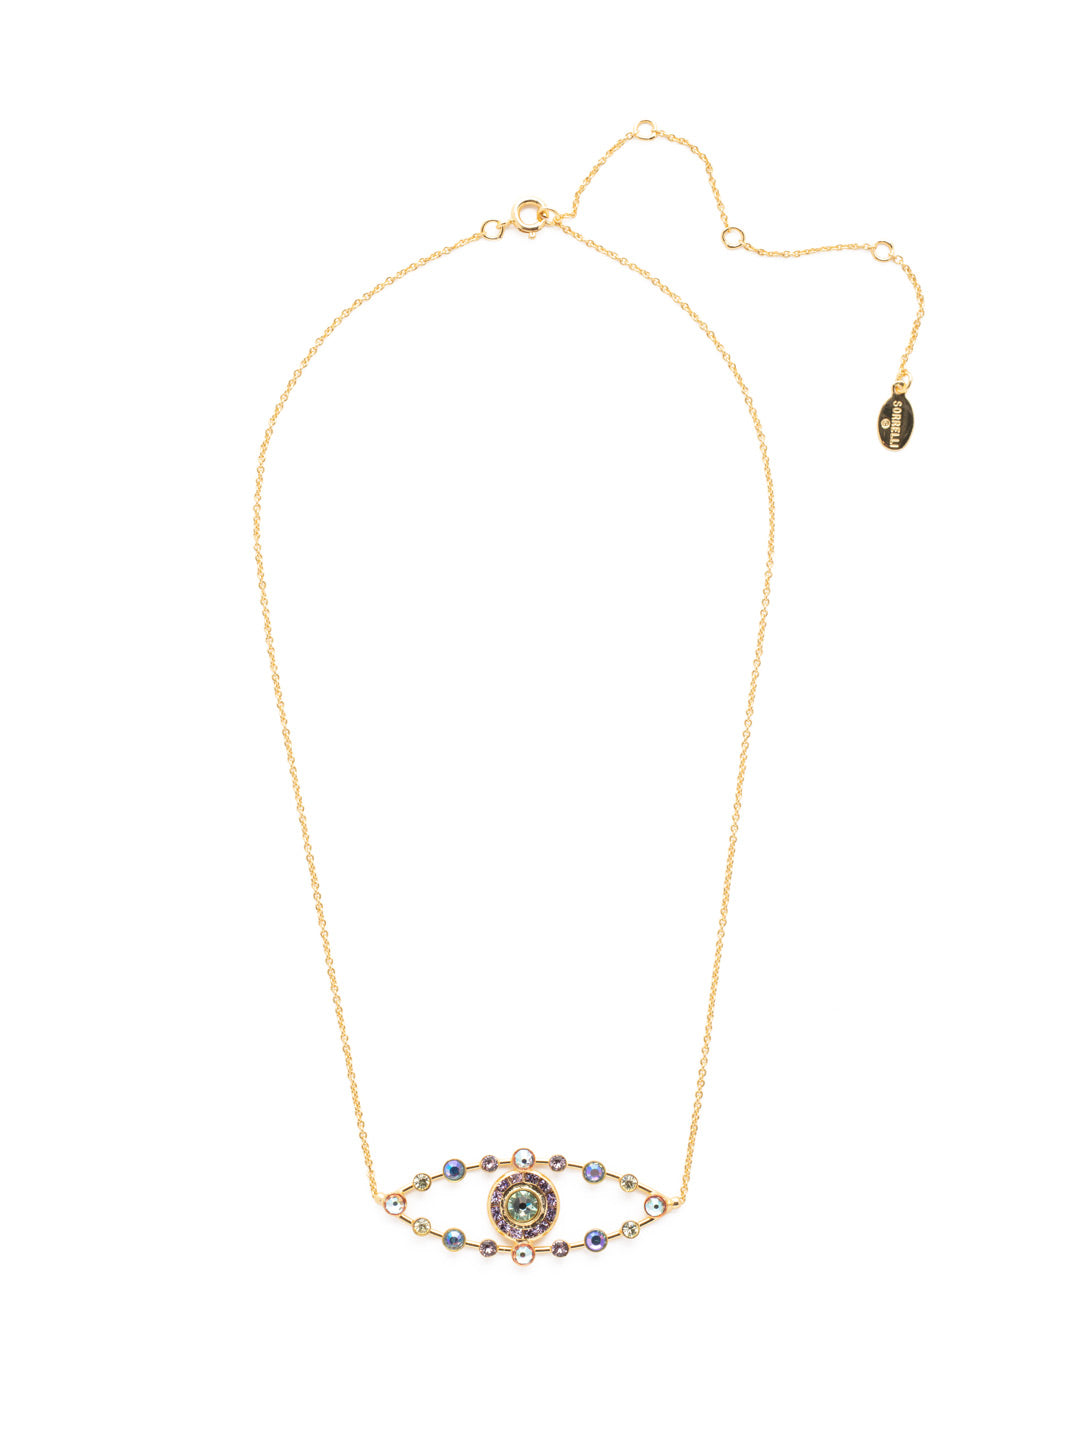 Evil Eye Pendant Necklace - NEV4BGSPR - <p>Perfect for fans of the Evil Eye symbol, our Evil Eye Crystal Pendant Necklace is highlighted with signature Sorrelli crystals. From Sorrelli's Spring Rain collection in our Bright Gold-tone finish.</p>